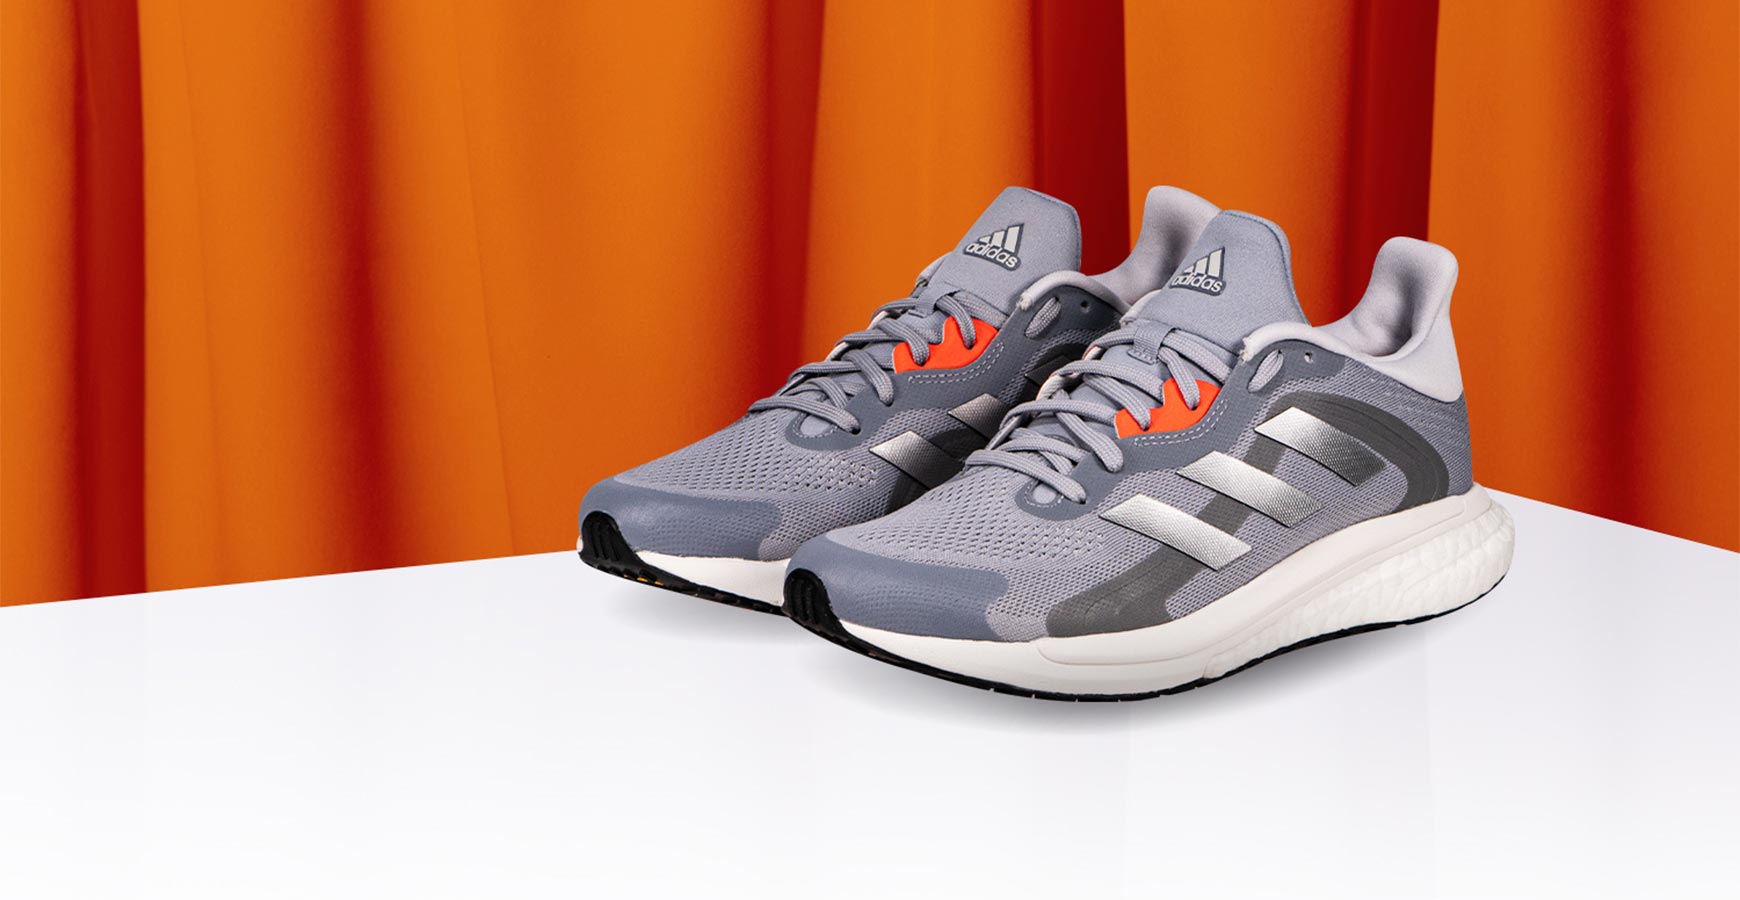 adidas 4 ST - Review | Trainers, Clothing and Accessories